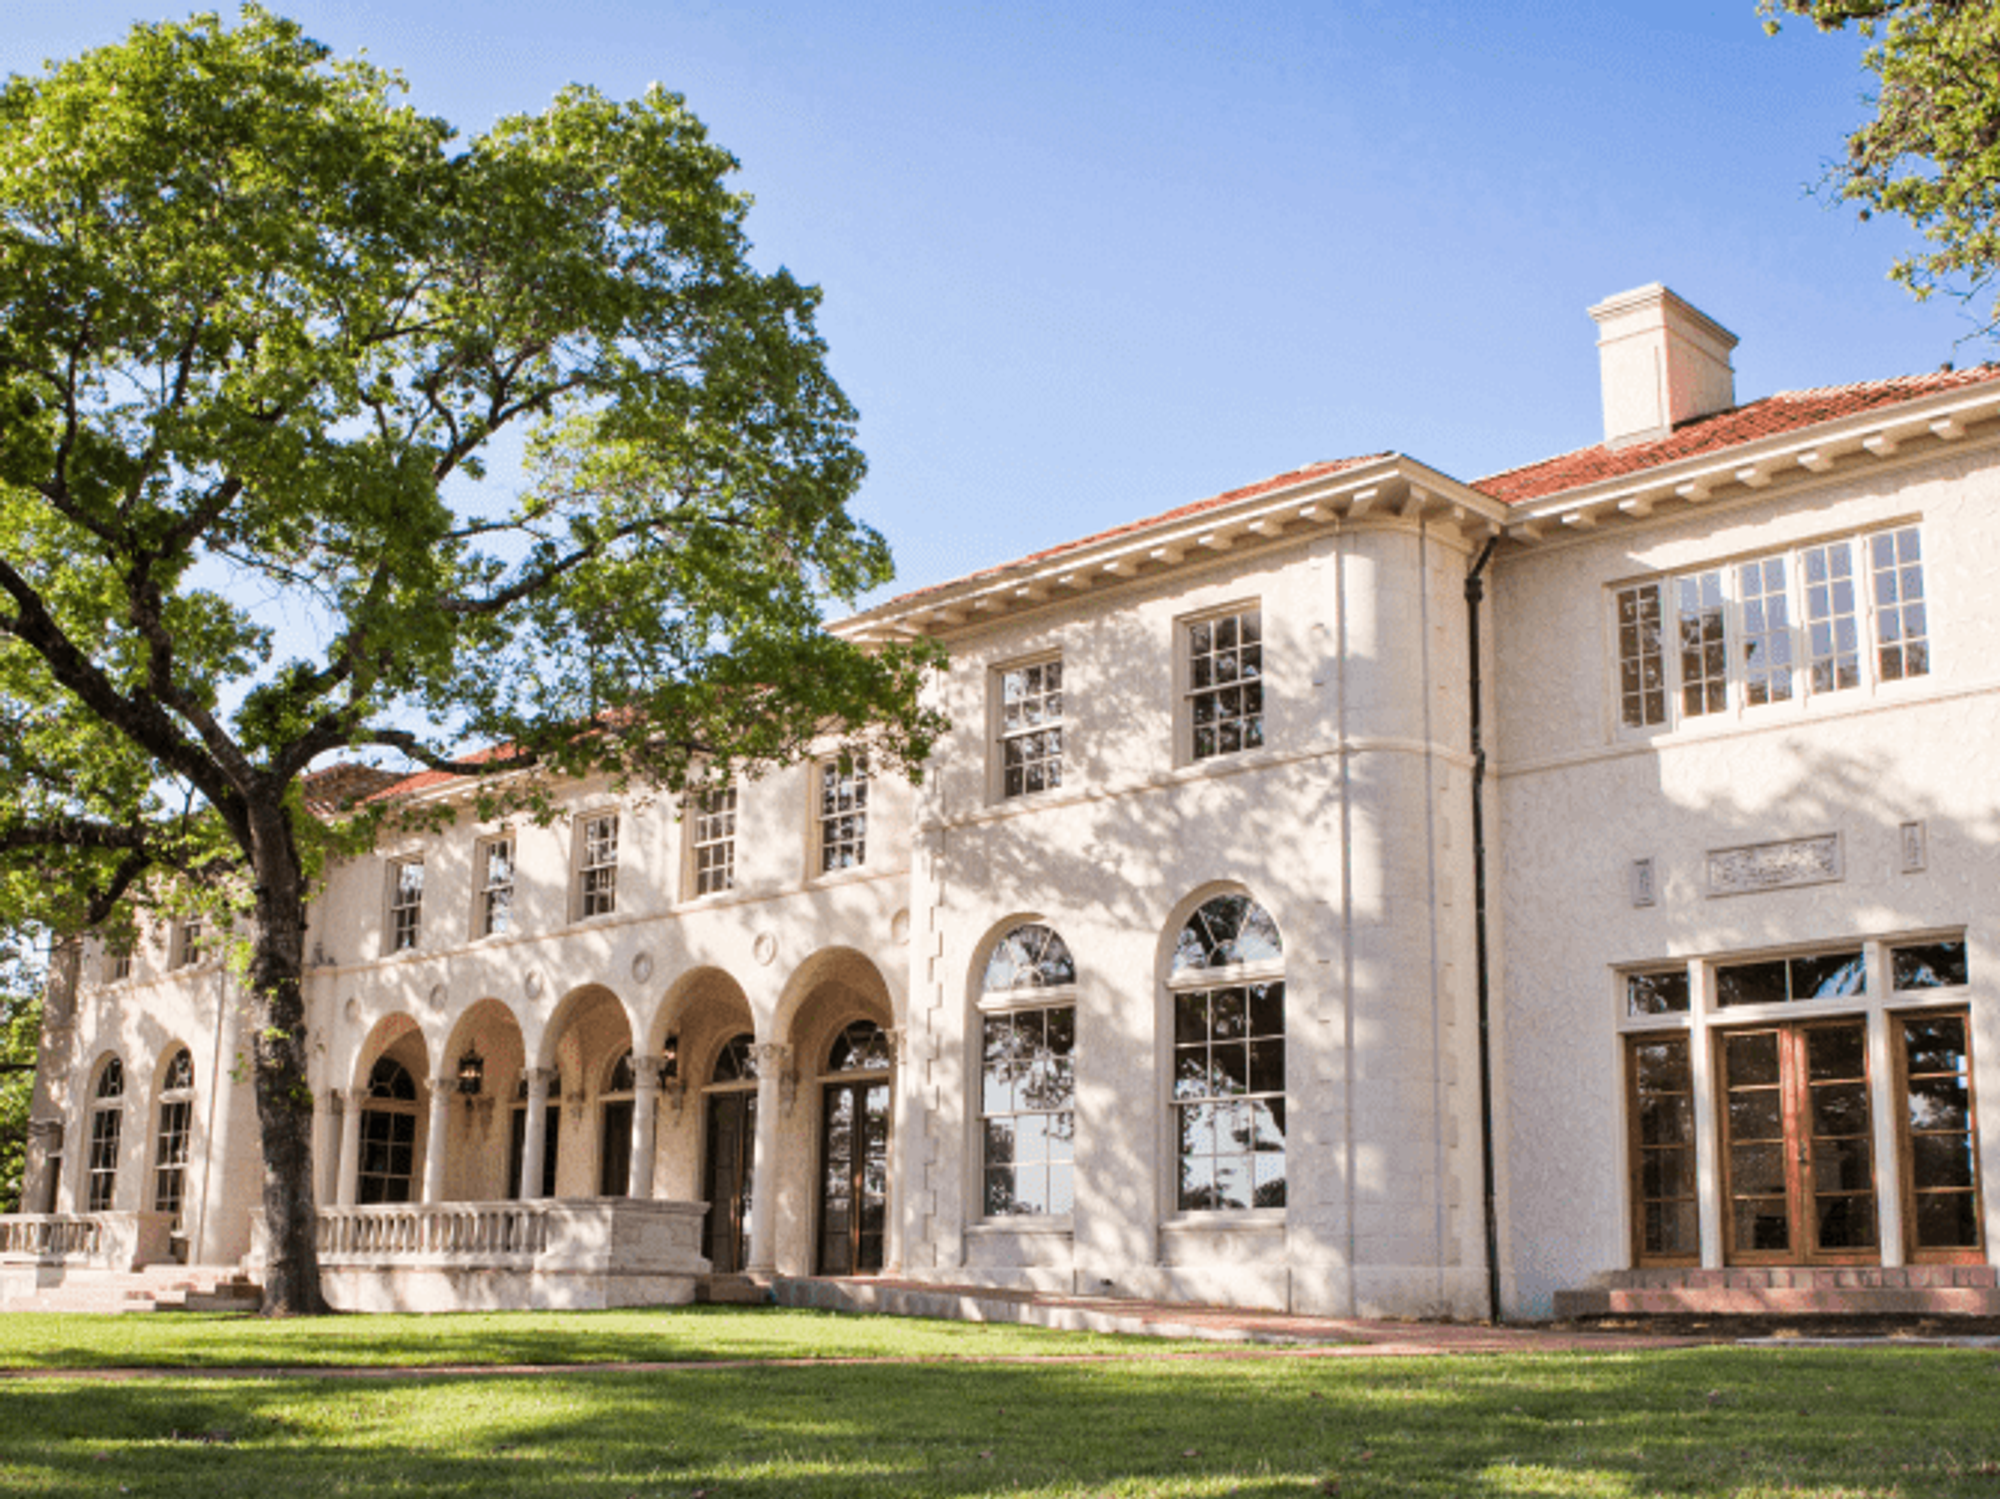 The Commodore Perry Estate is now open.